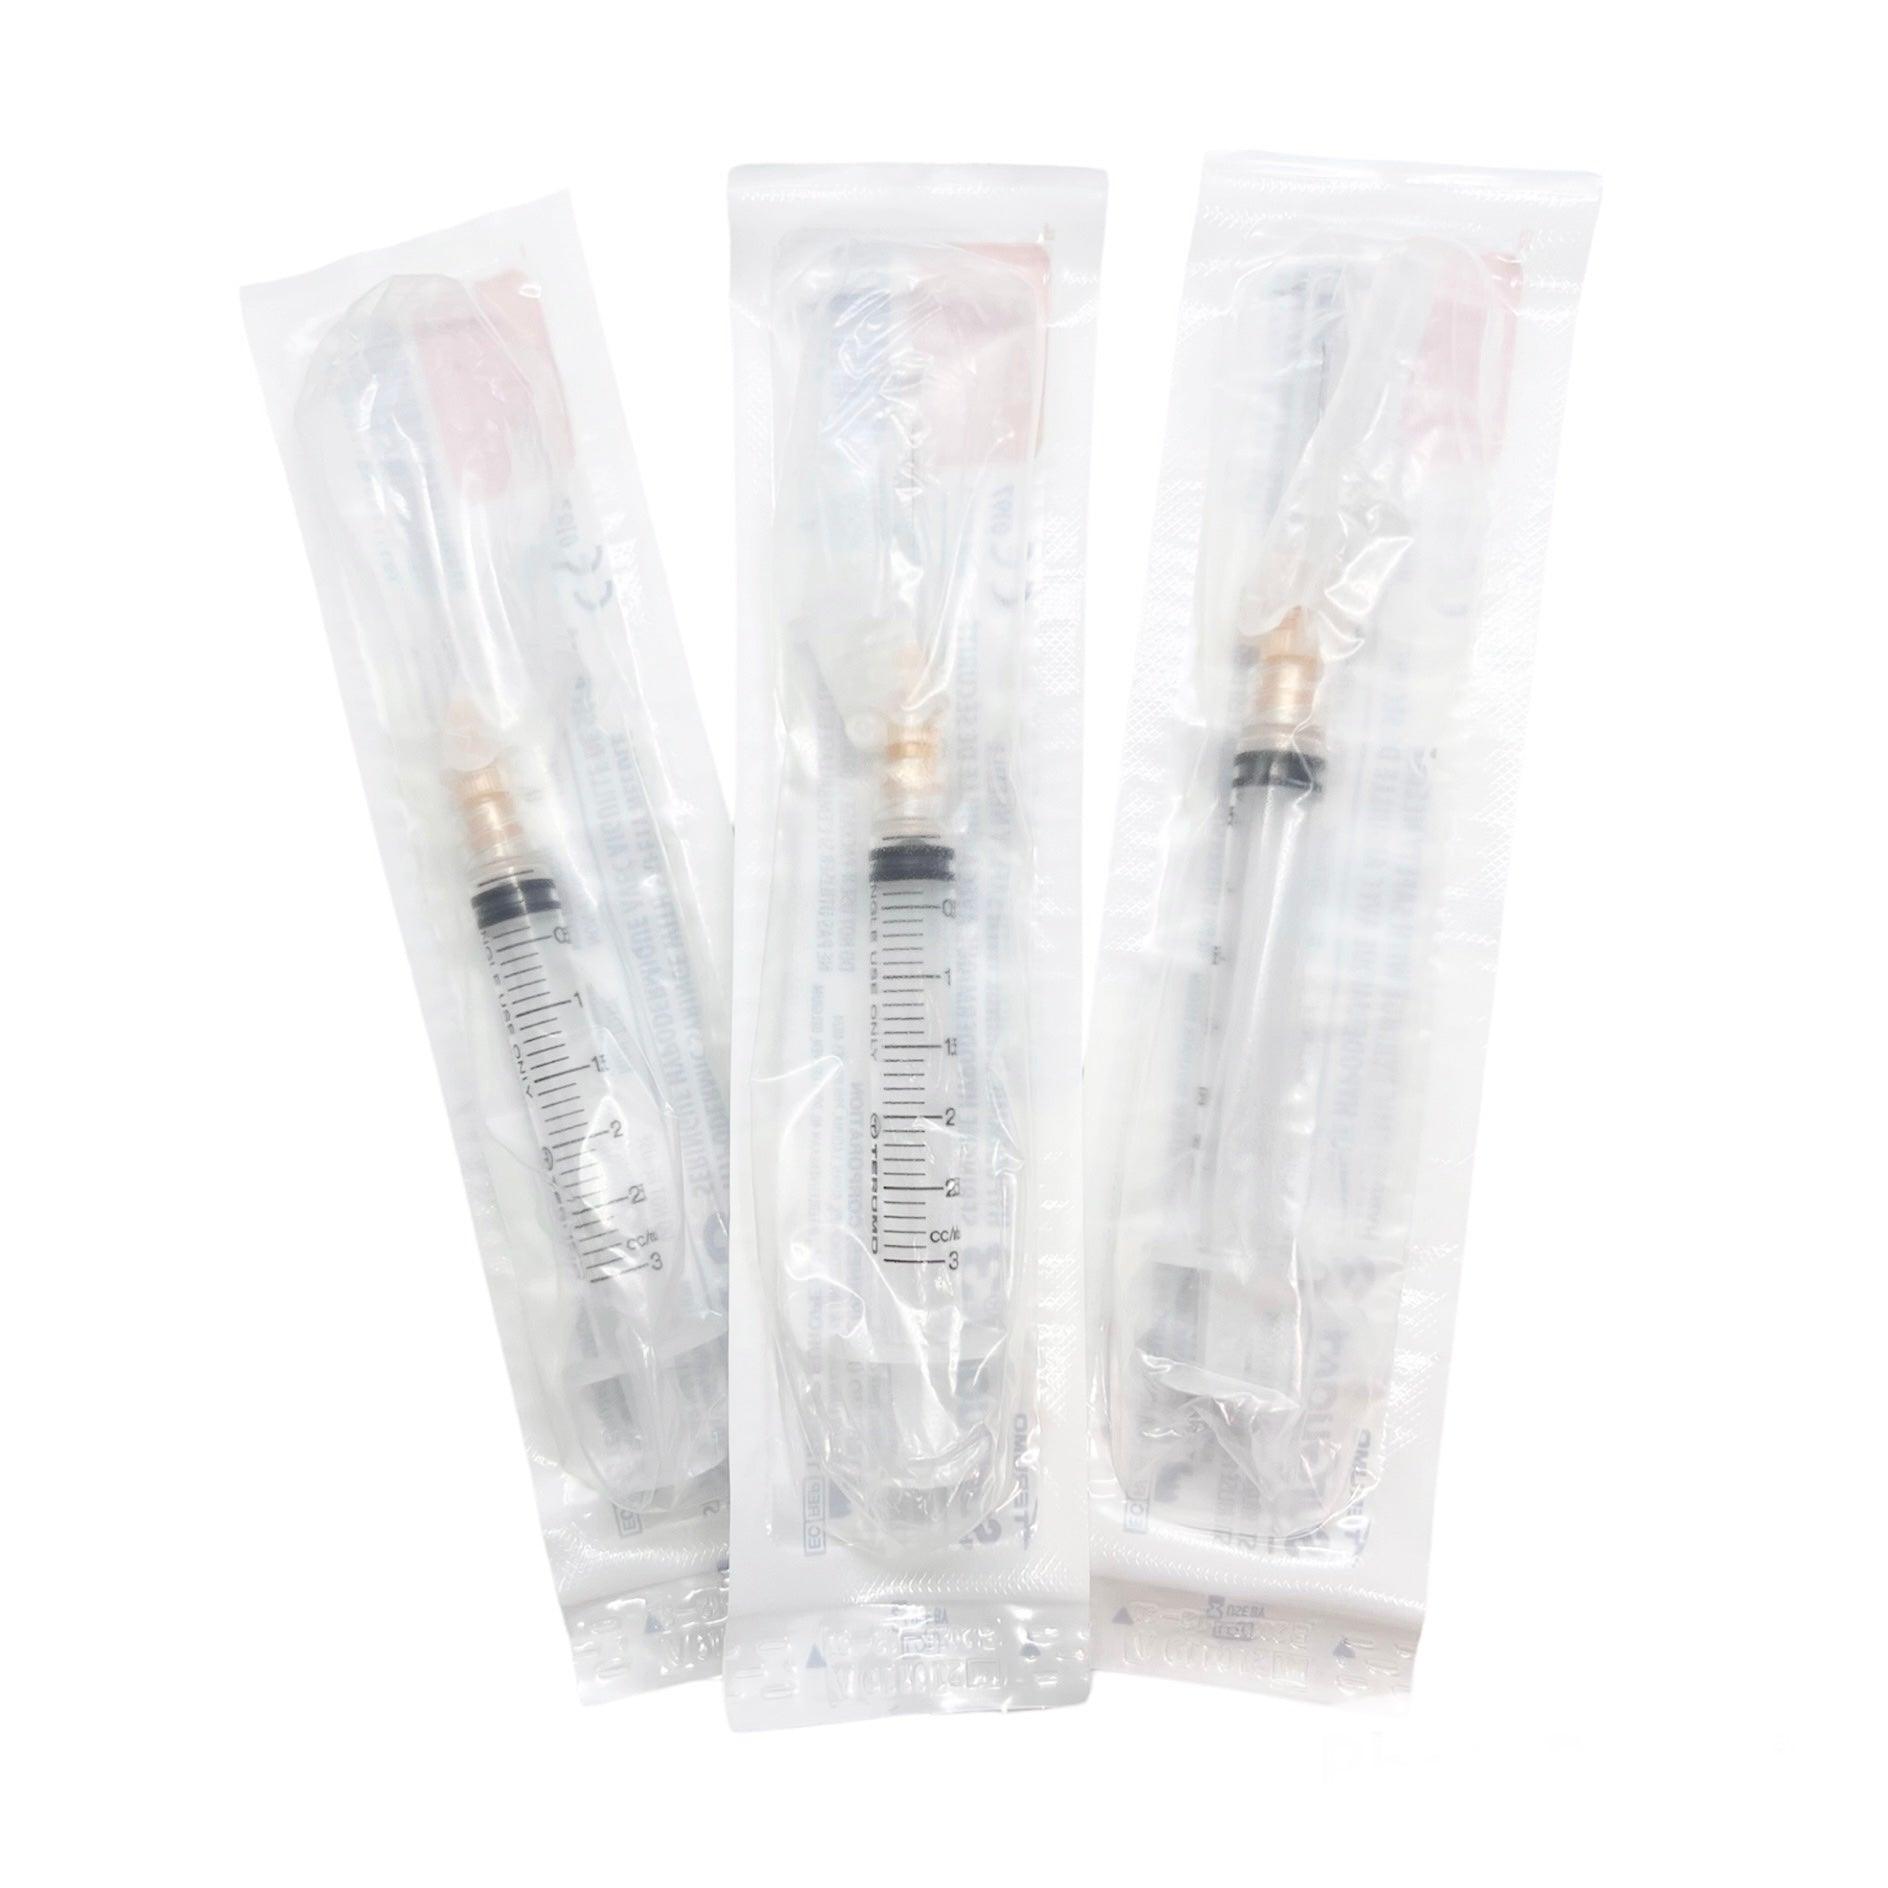 3 mL | 25G x 1" - Terumo SG3-03L2525 Hypodermic Syringes with Safety Needle | SurGuard 3 | 100 per Box